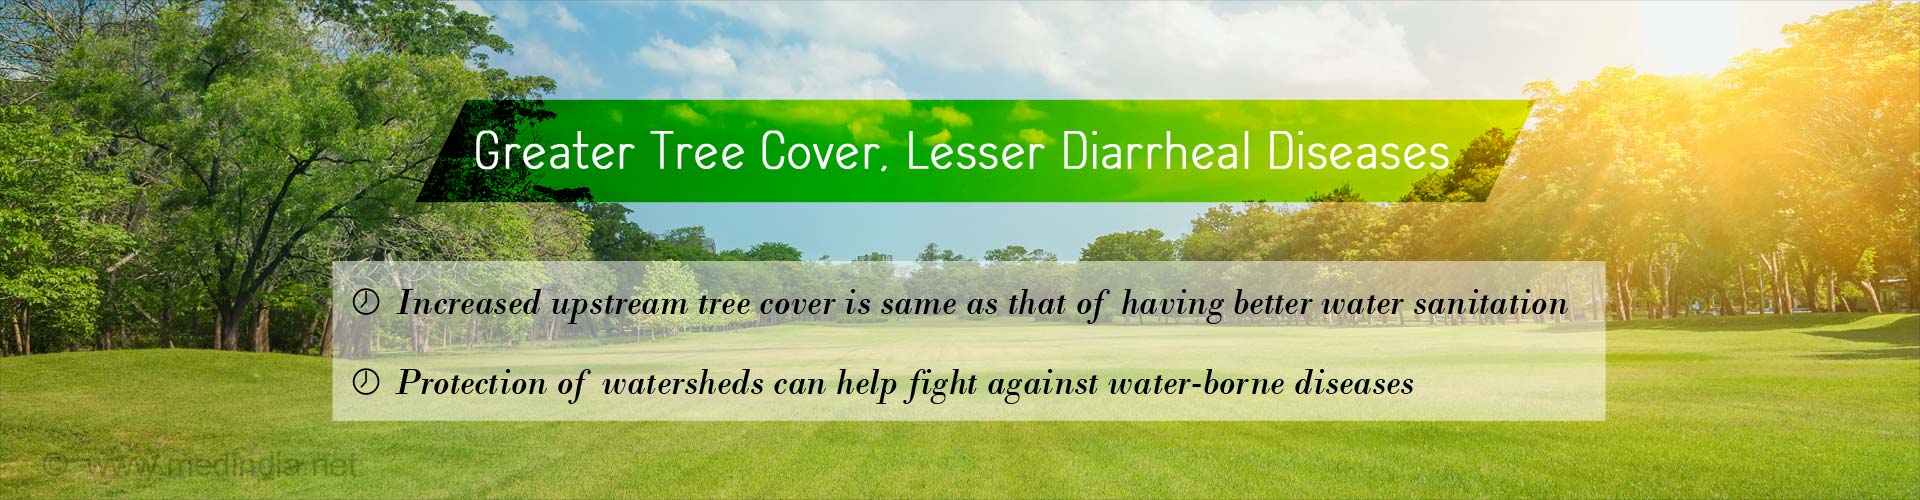 greater tree cover. lesser diarrheal diseases
- increased upstream tree cover is same as that of having better water sanitation
- protection of watersheds can help fight against water-borne diseases